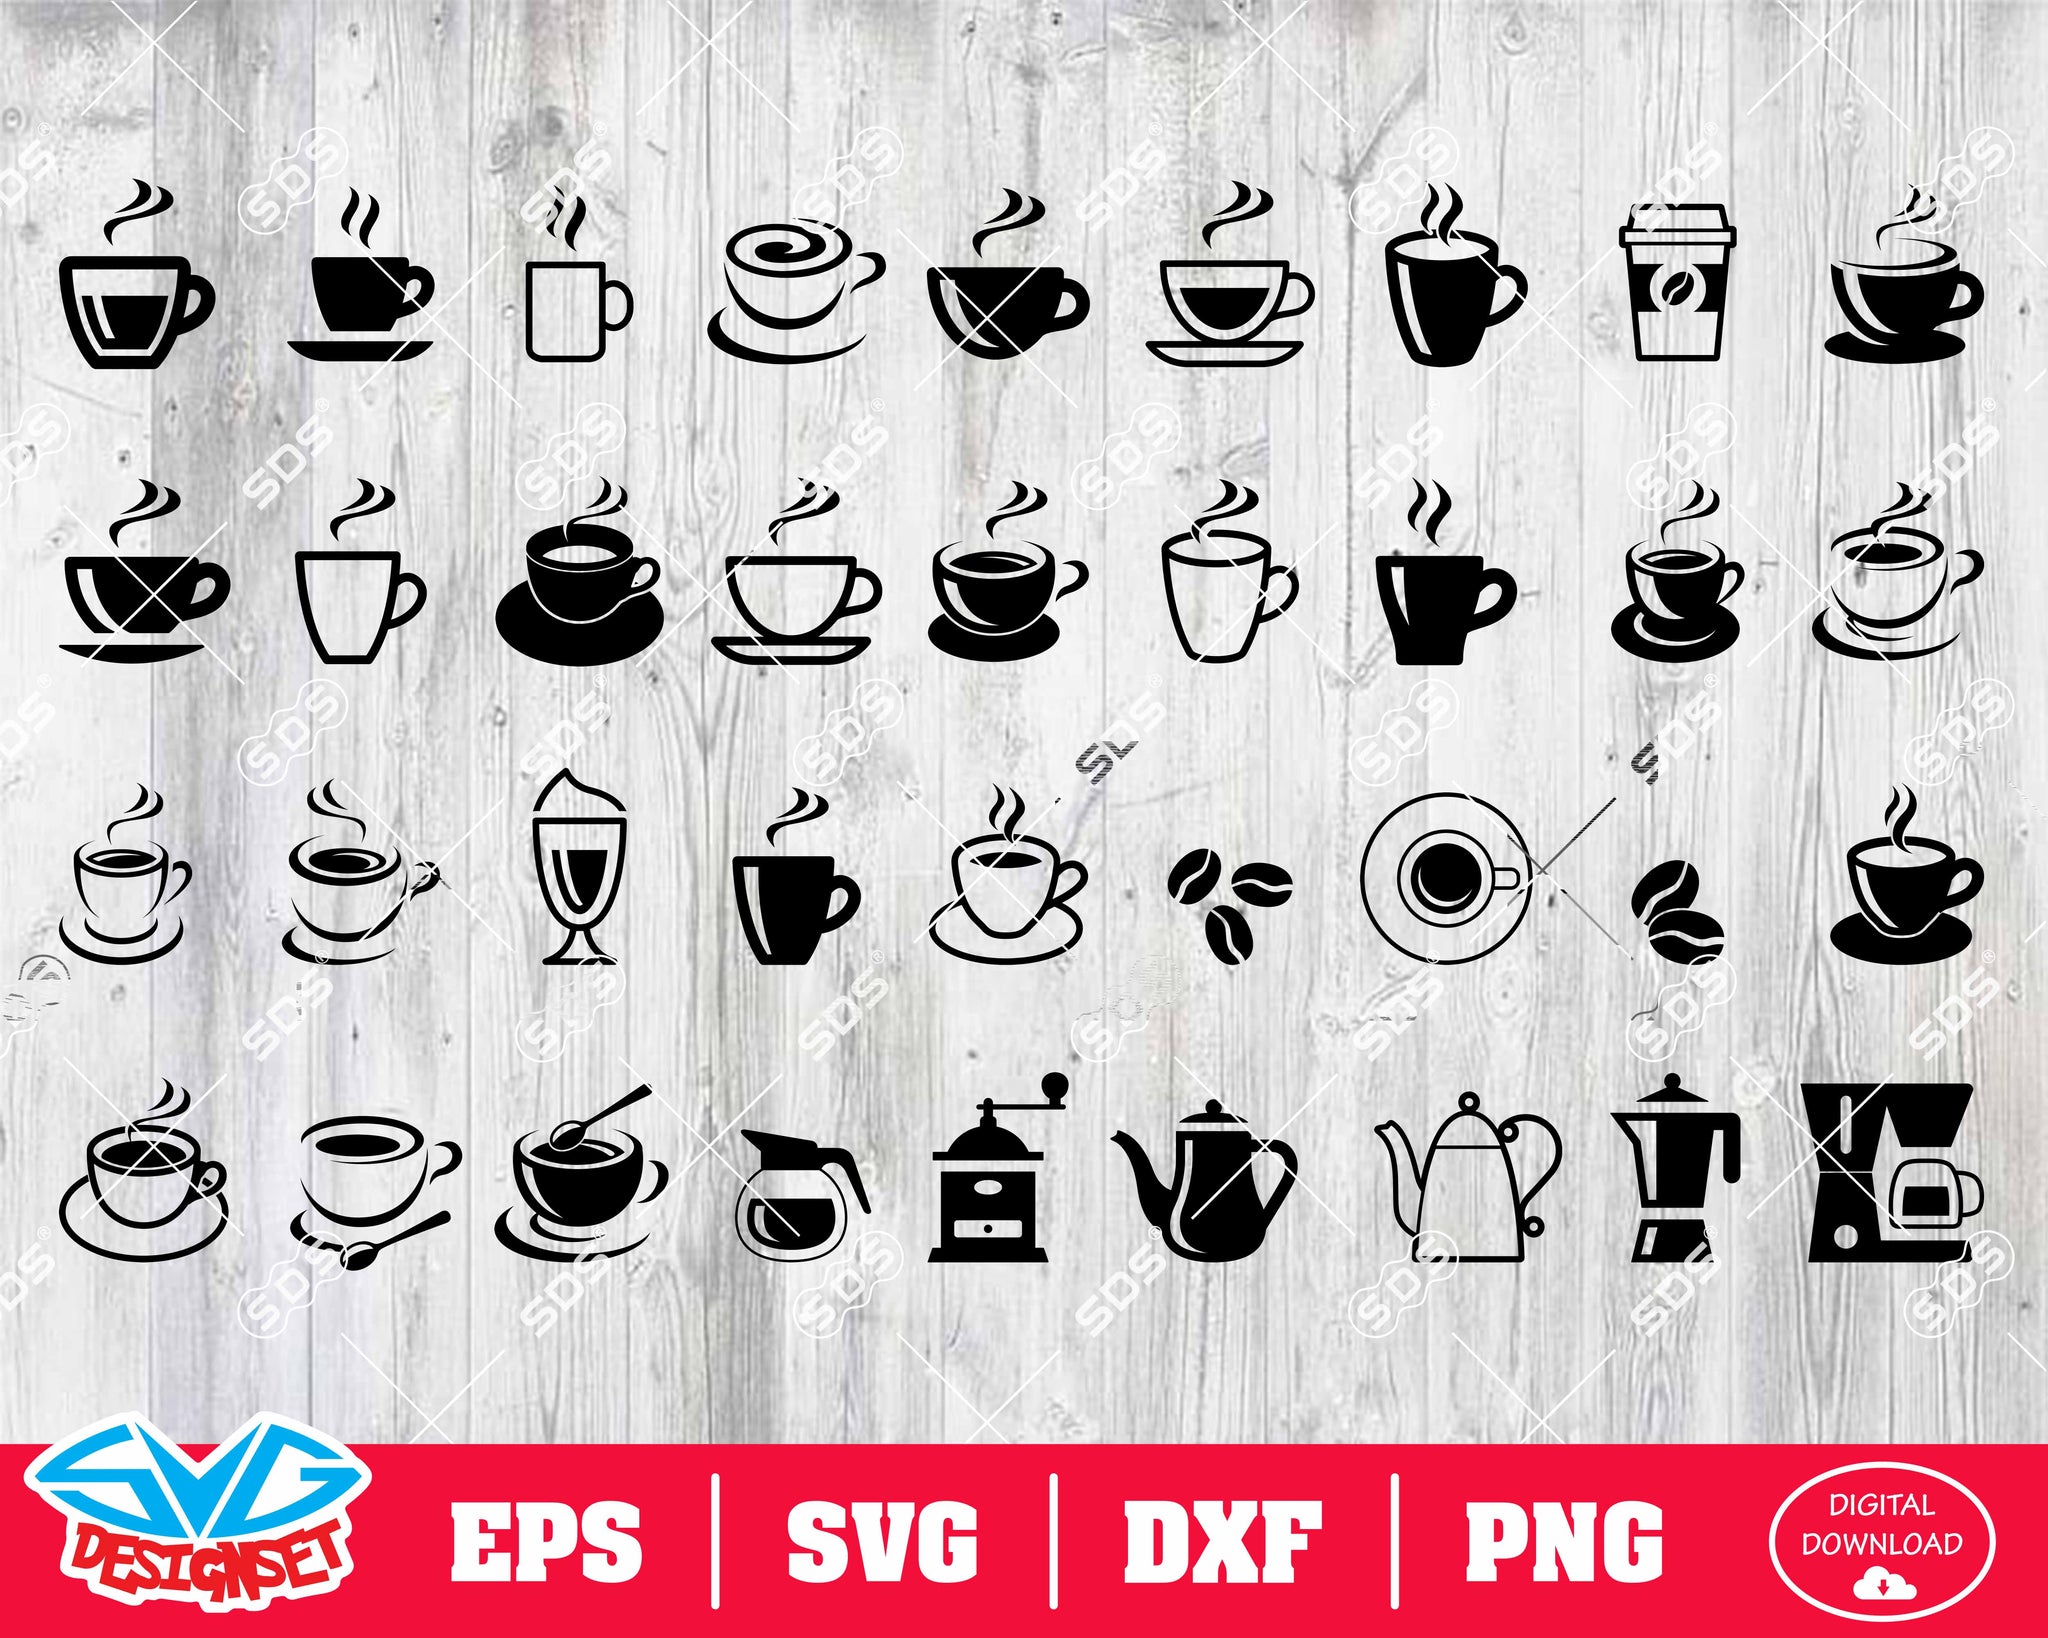 Coffee Svg, Dxf, Eps, Png, Clipart, Silhouette and Cutfiles #1 - SVGDesignSets